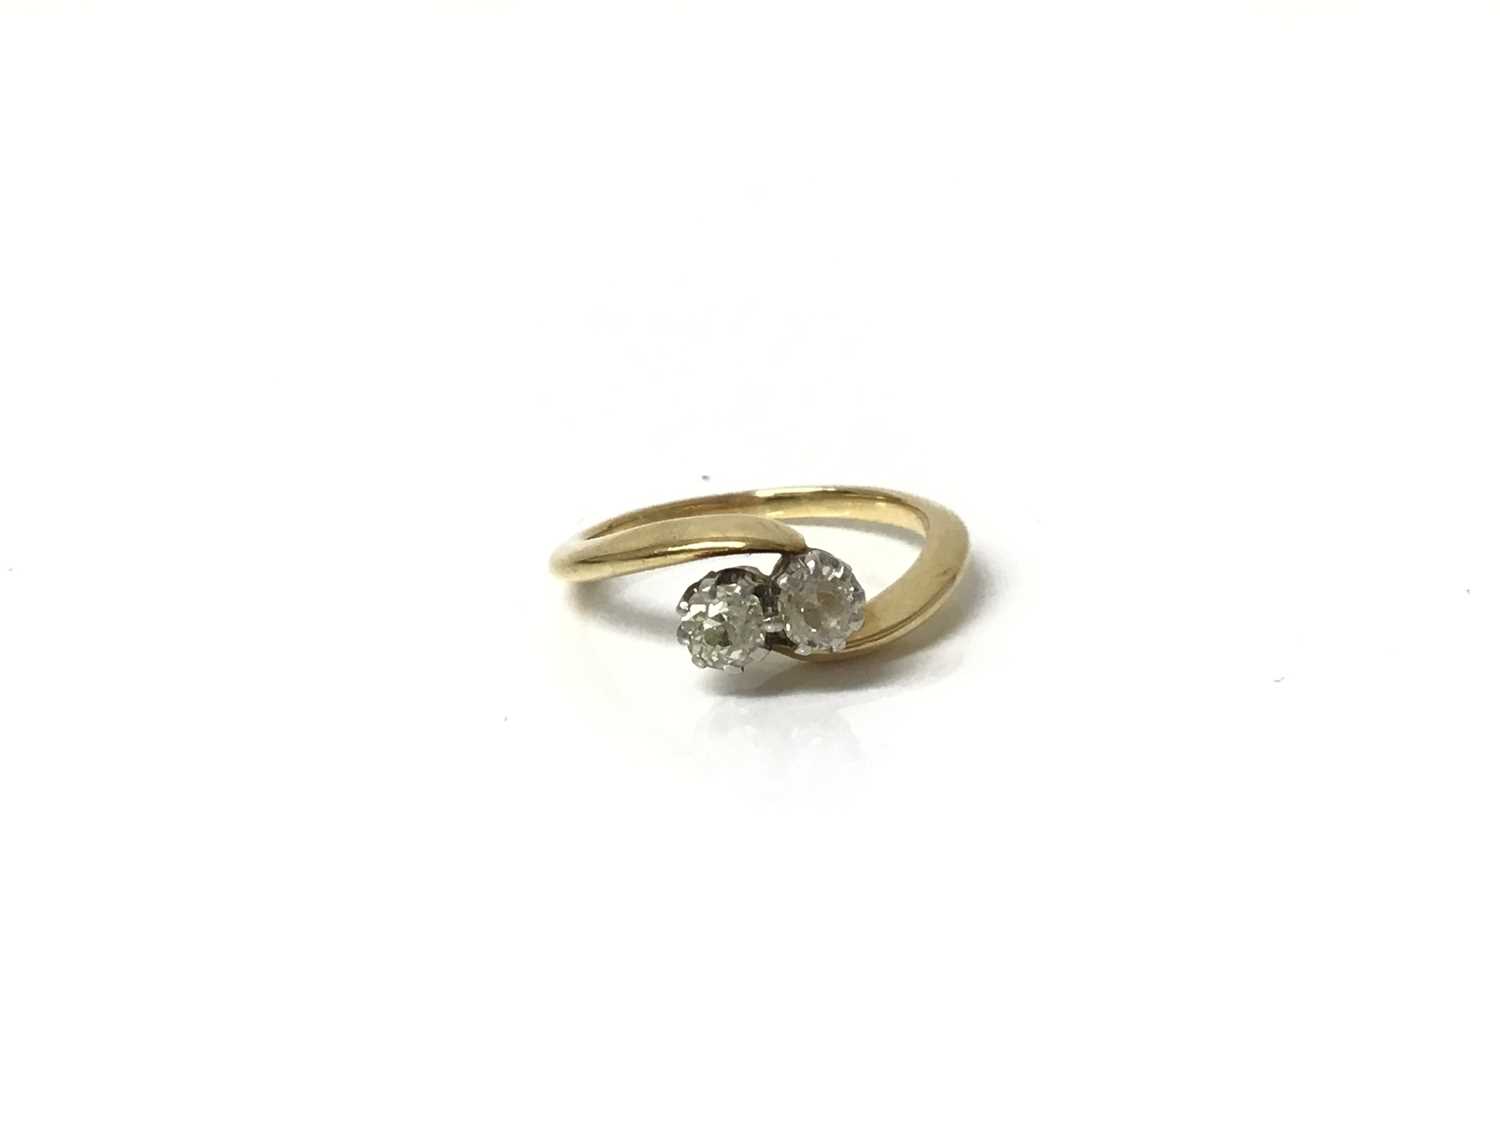 Lot 90 - Diamond two stone crossover ring with two old cut diamonds in claw setting on gold shank. Ring size J